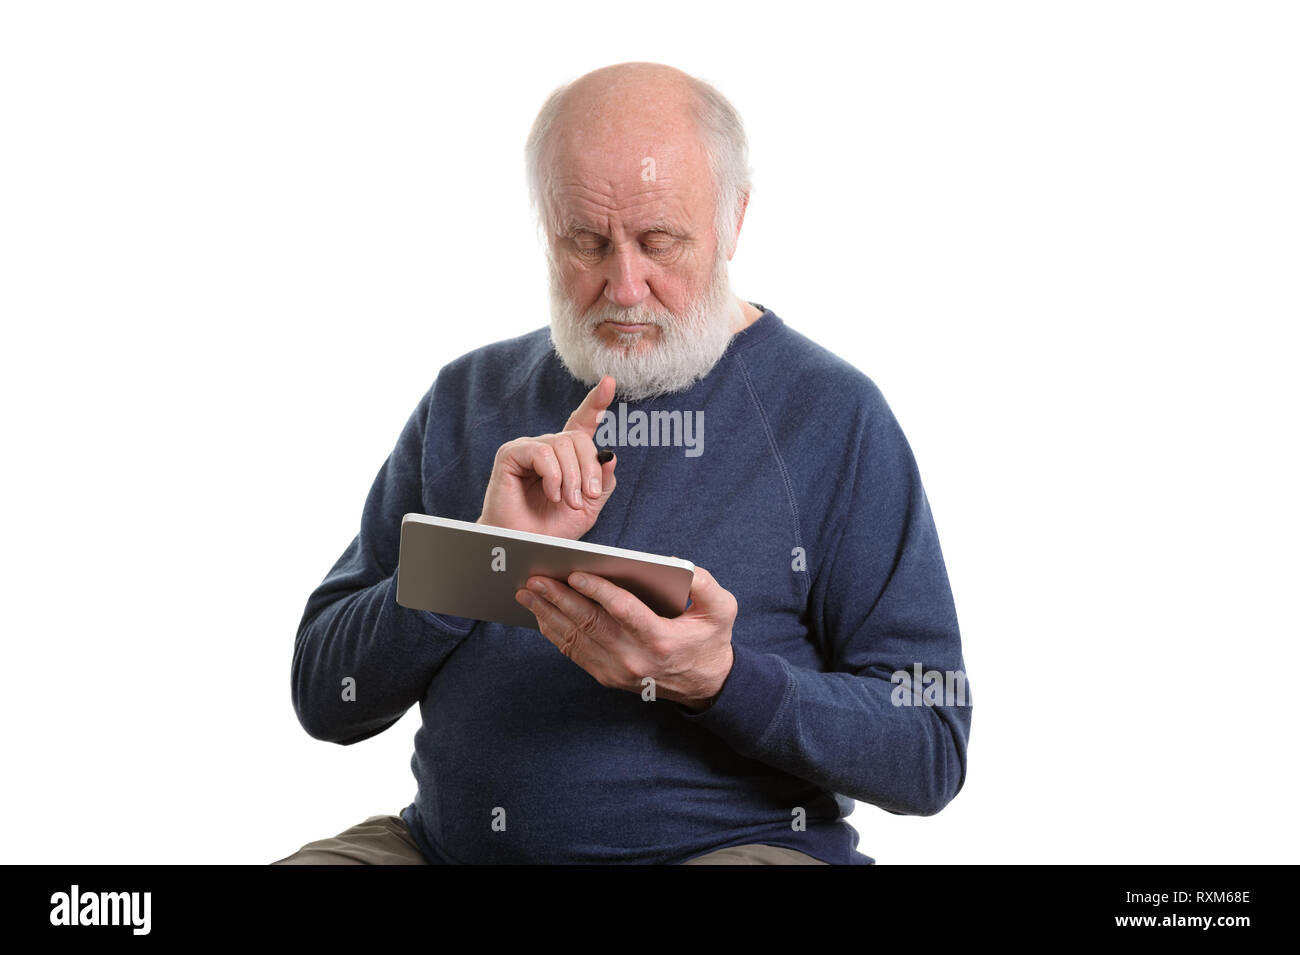 Funny old man using tablet computer isolated on white Stock Photo